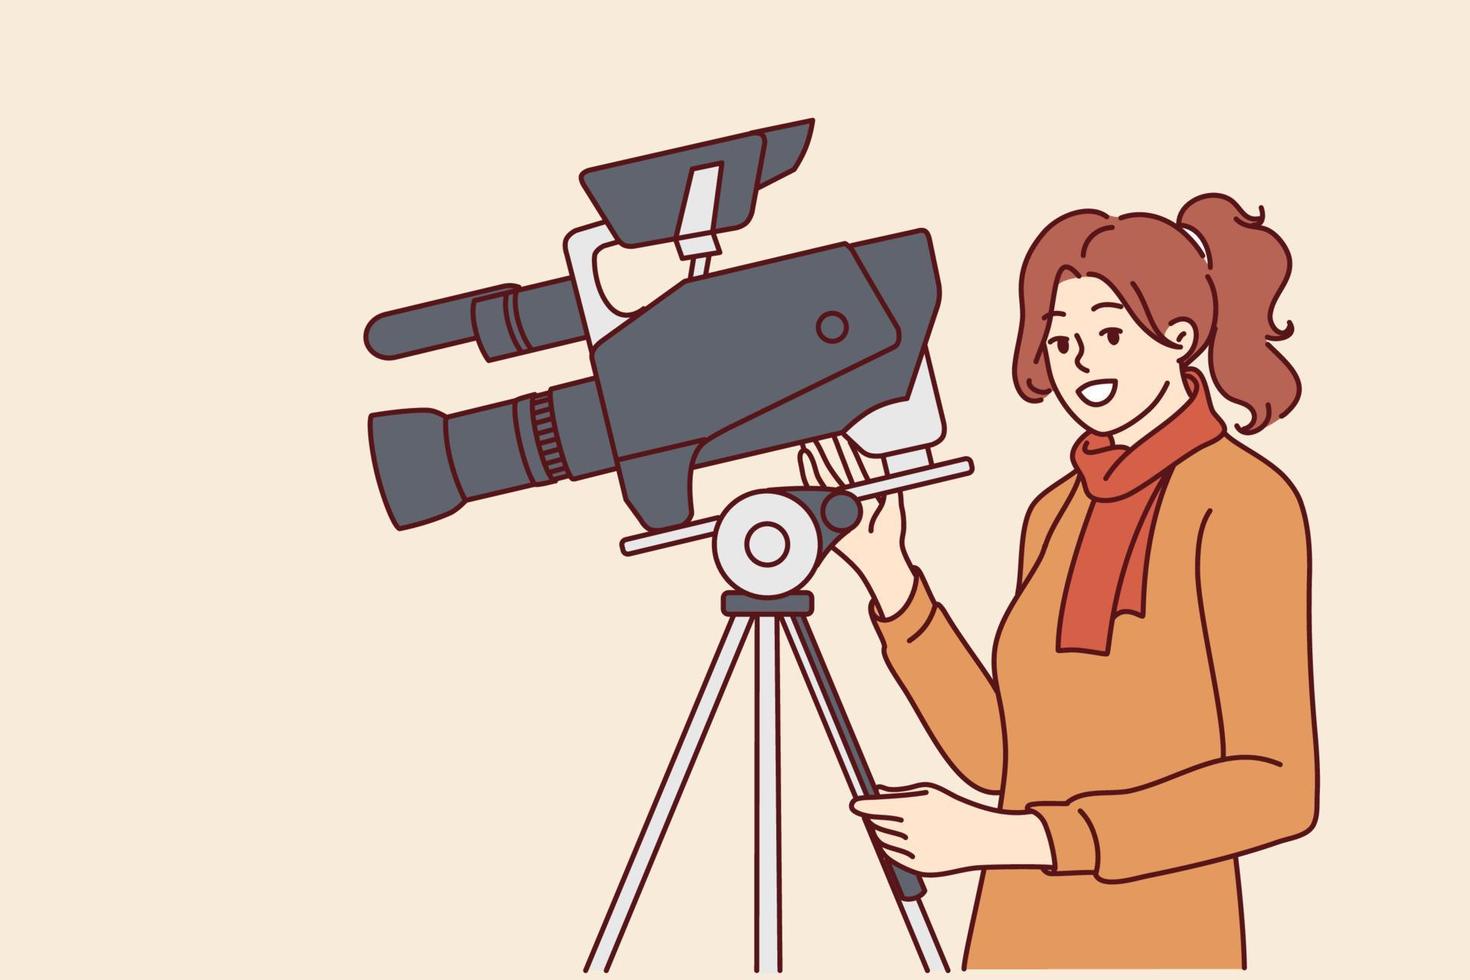 Woman videographer stands near professional video camera fixed on tripod and shoots film or news report. Girl working as producer or director in film studio uses modern filming equipment vector